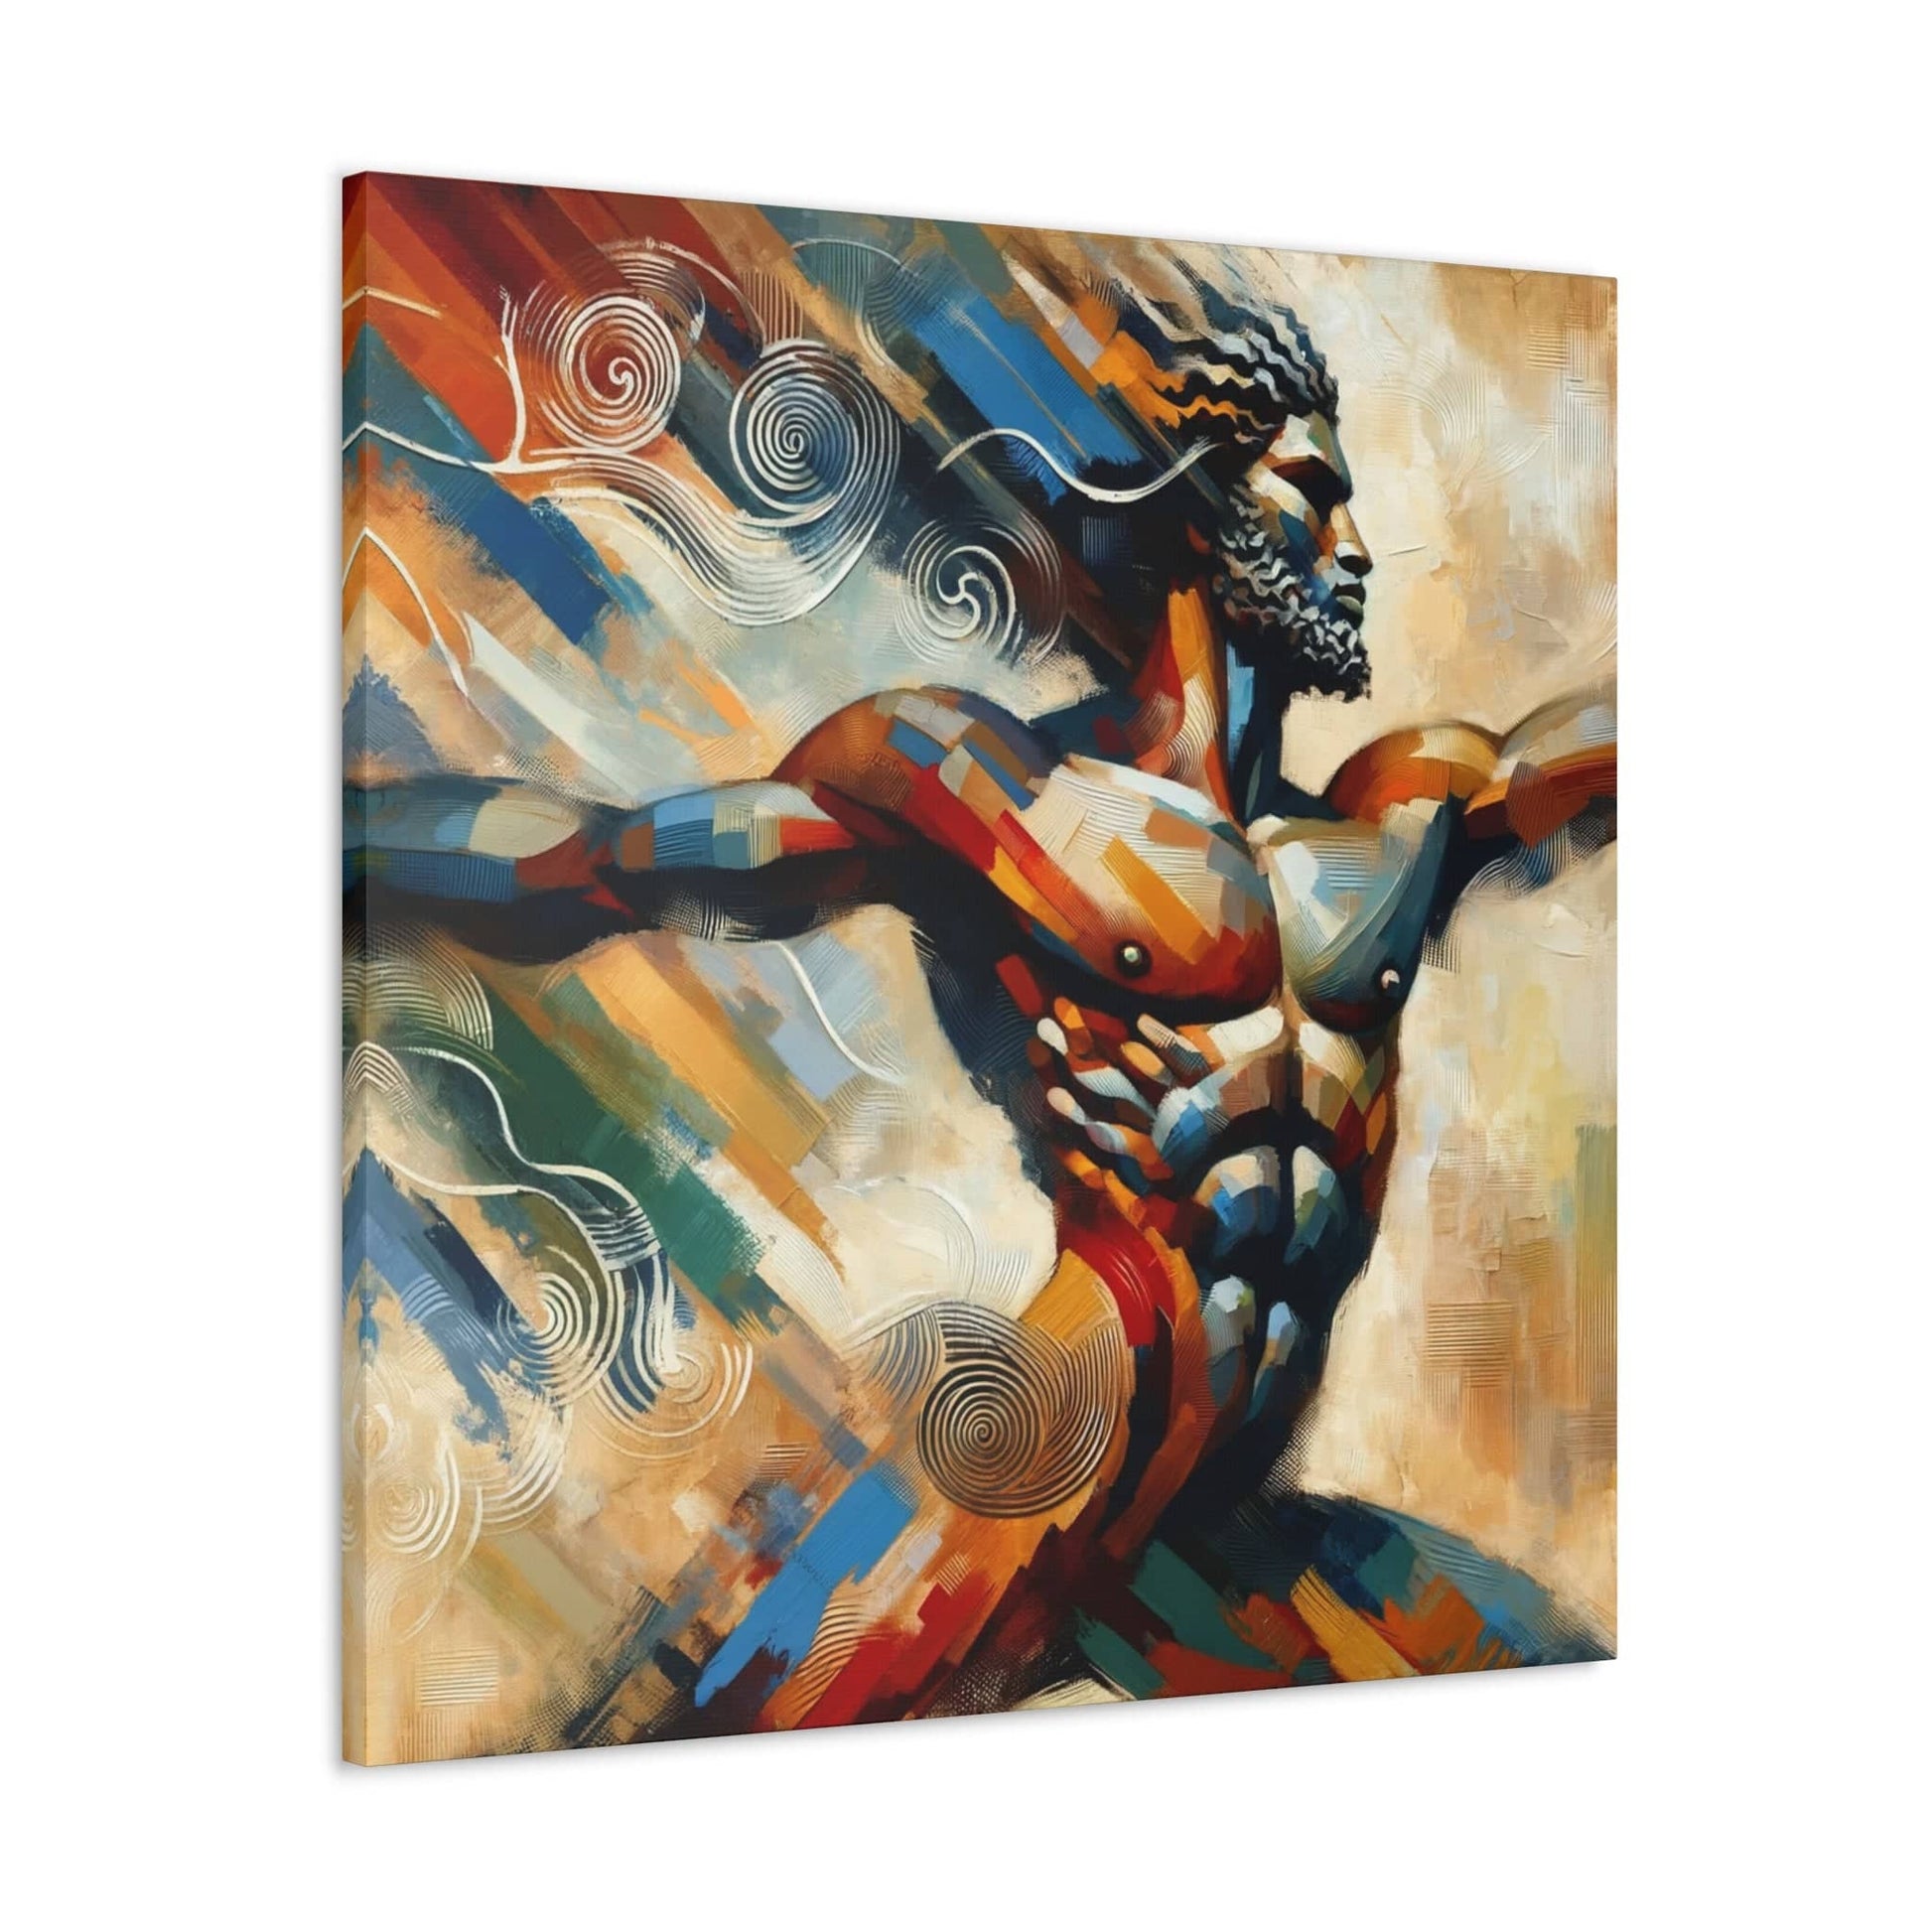 A Printify Whirlwind Warrior Canvas Art depicted in a canvas art painting, with his arms outstretched.